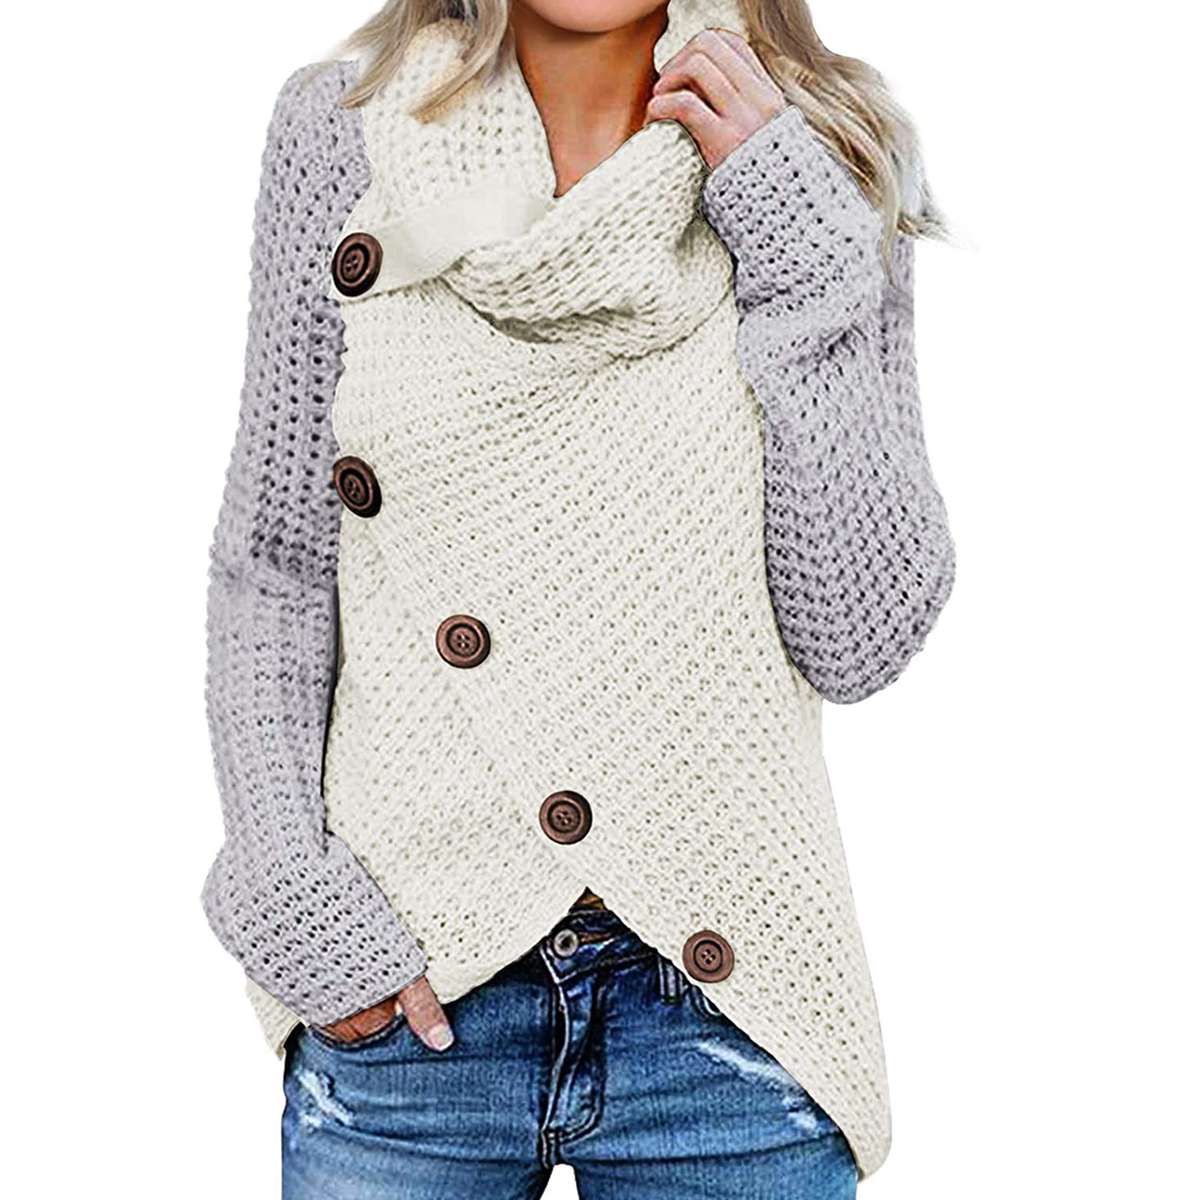 This Button-Front Asymmetrical Sweater From Amazon Is a Fall Must-Have ...